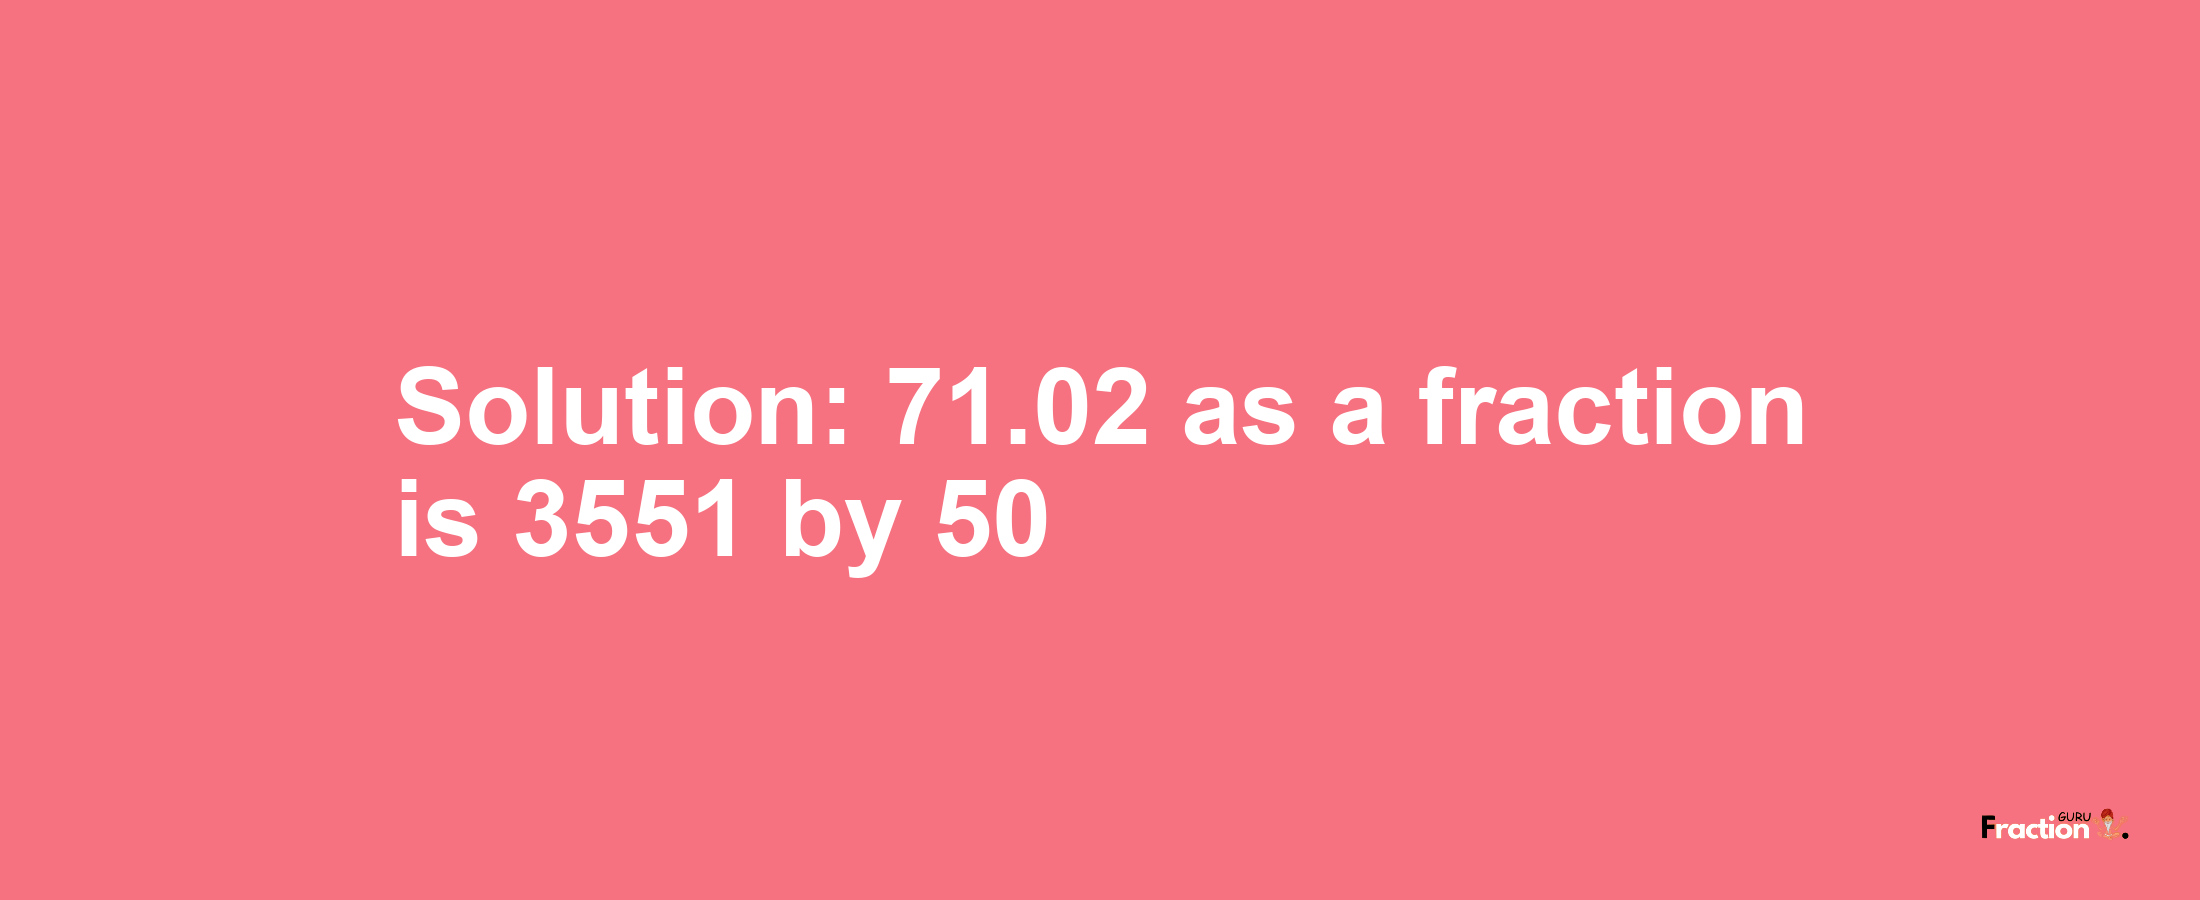 Solution:71.02 as a fraction is 3551/50